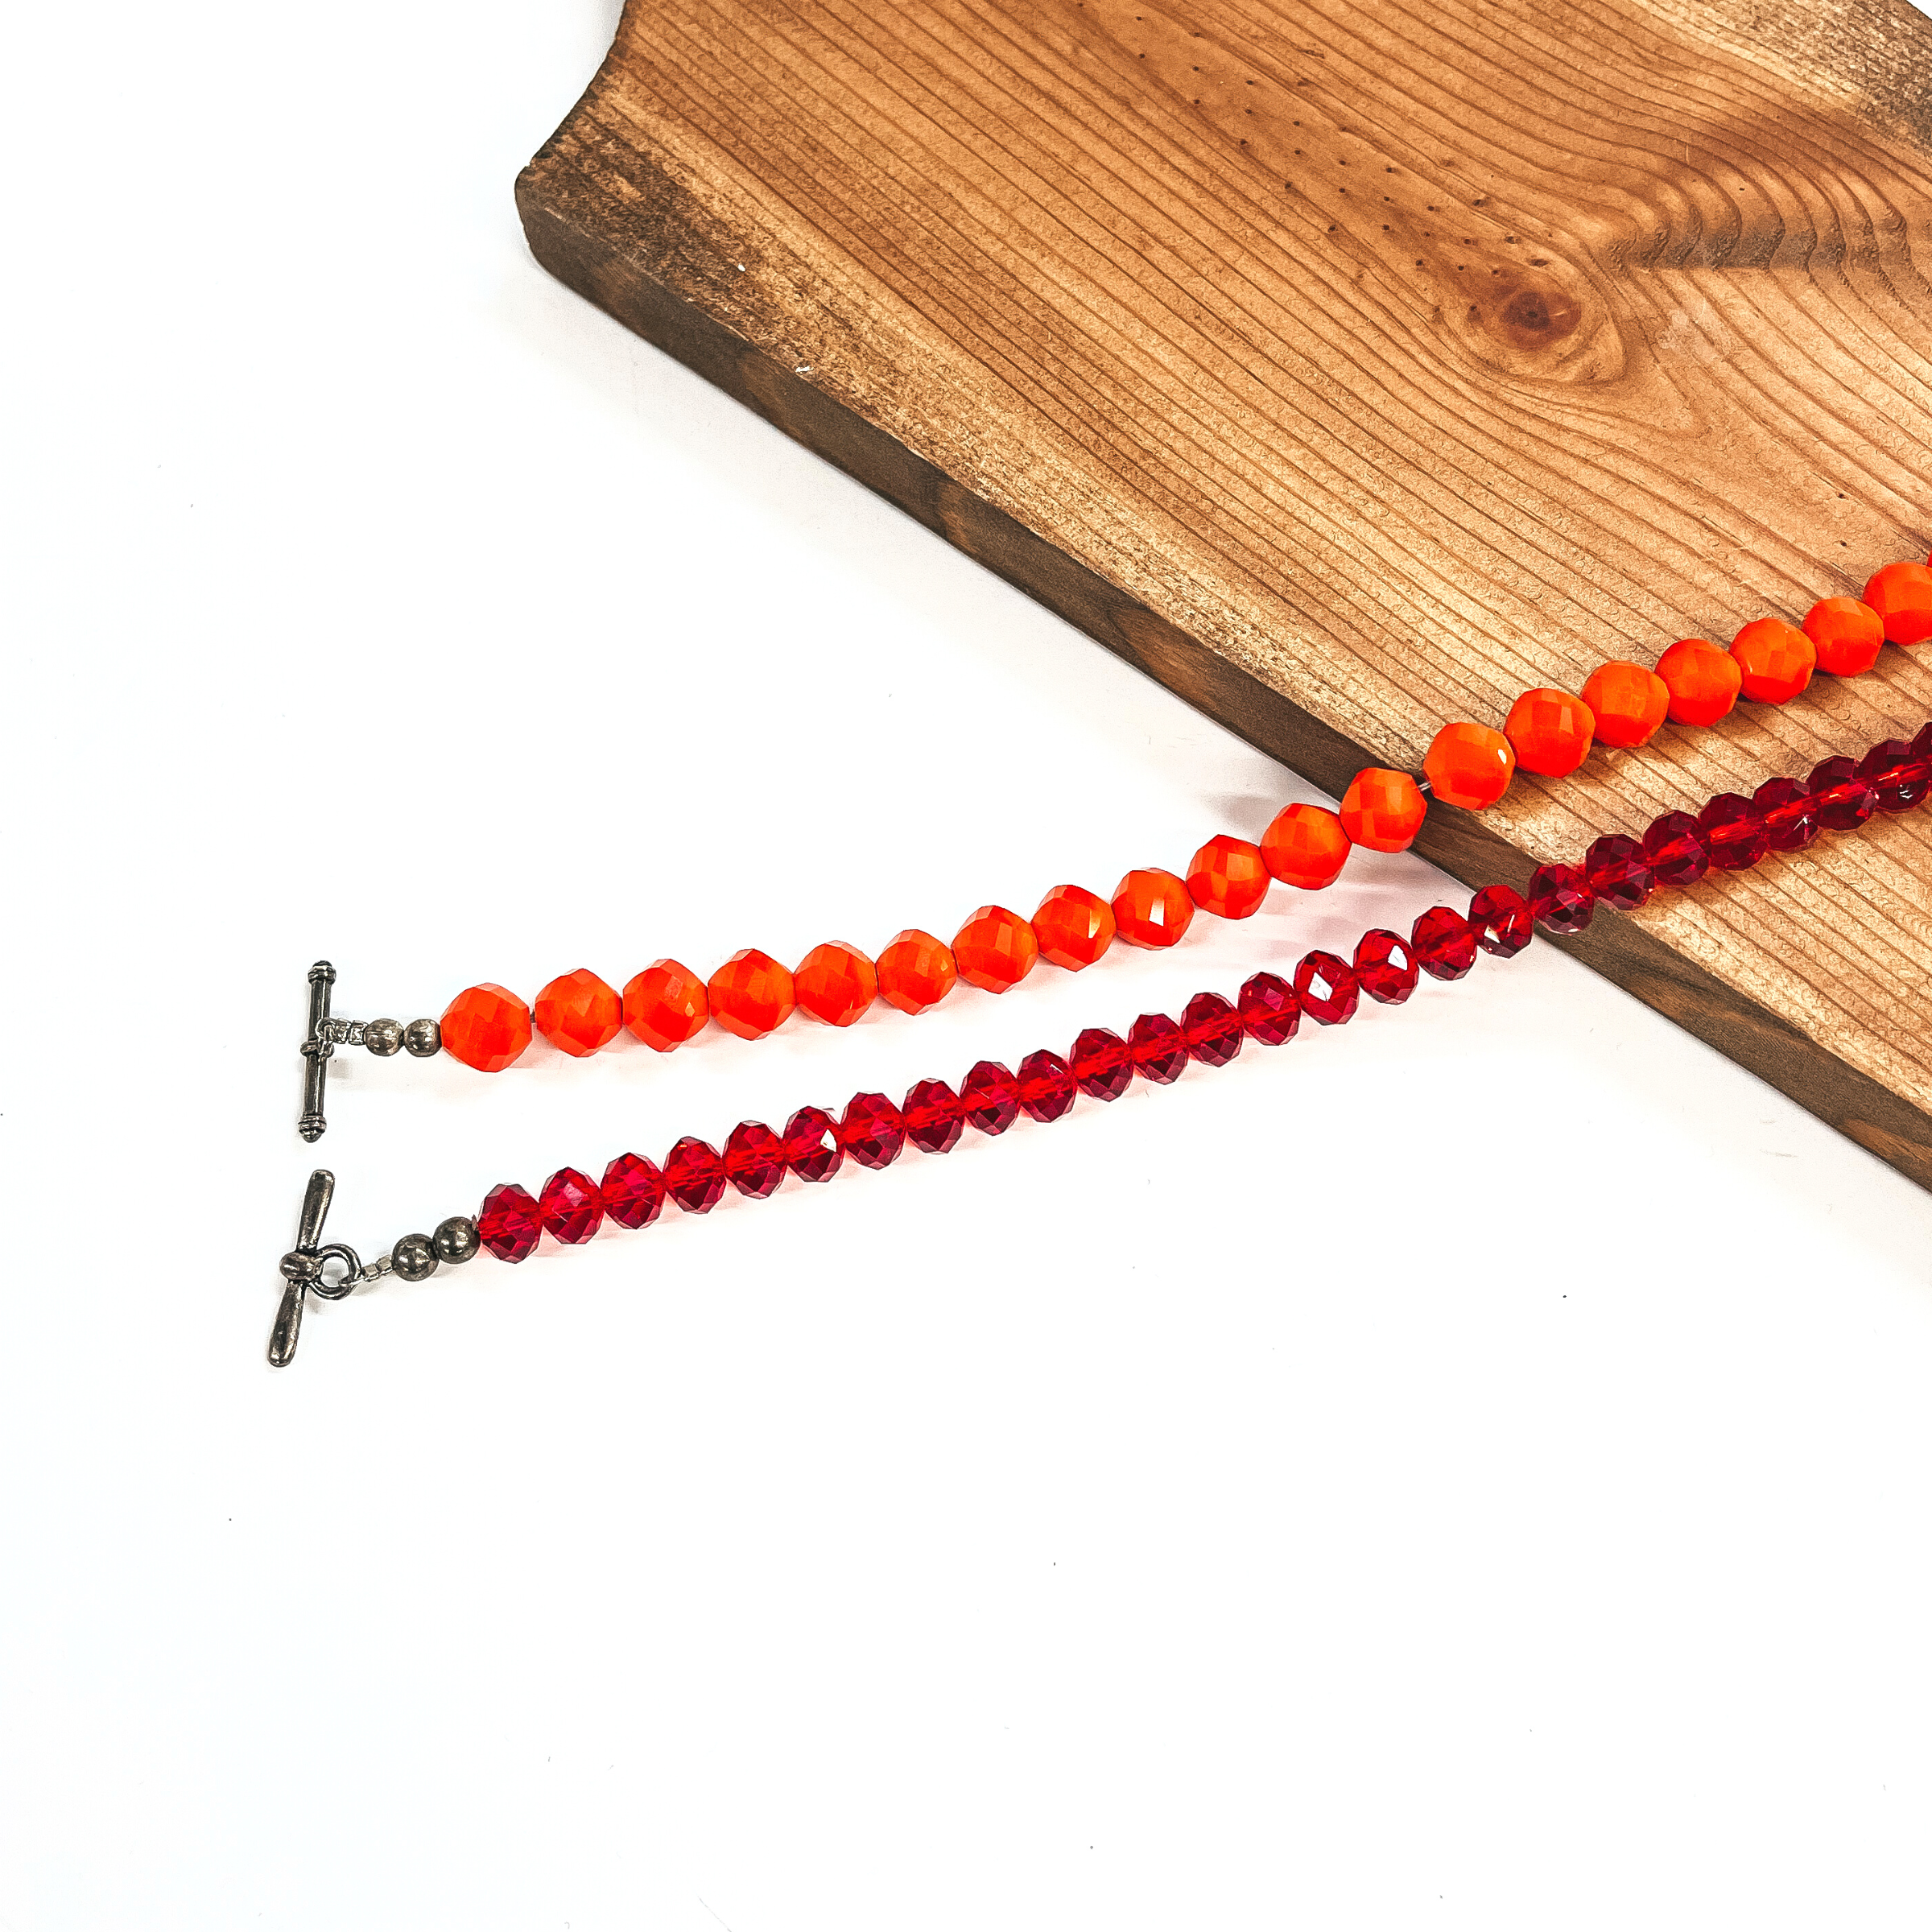 Fun Crystal Necklaces Handstrung at GUG in Orange and Red | ONLY 1 LEFT! - Giddy Up Glamour Boutique